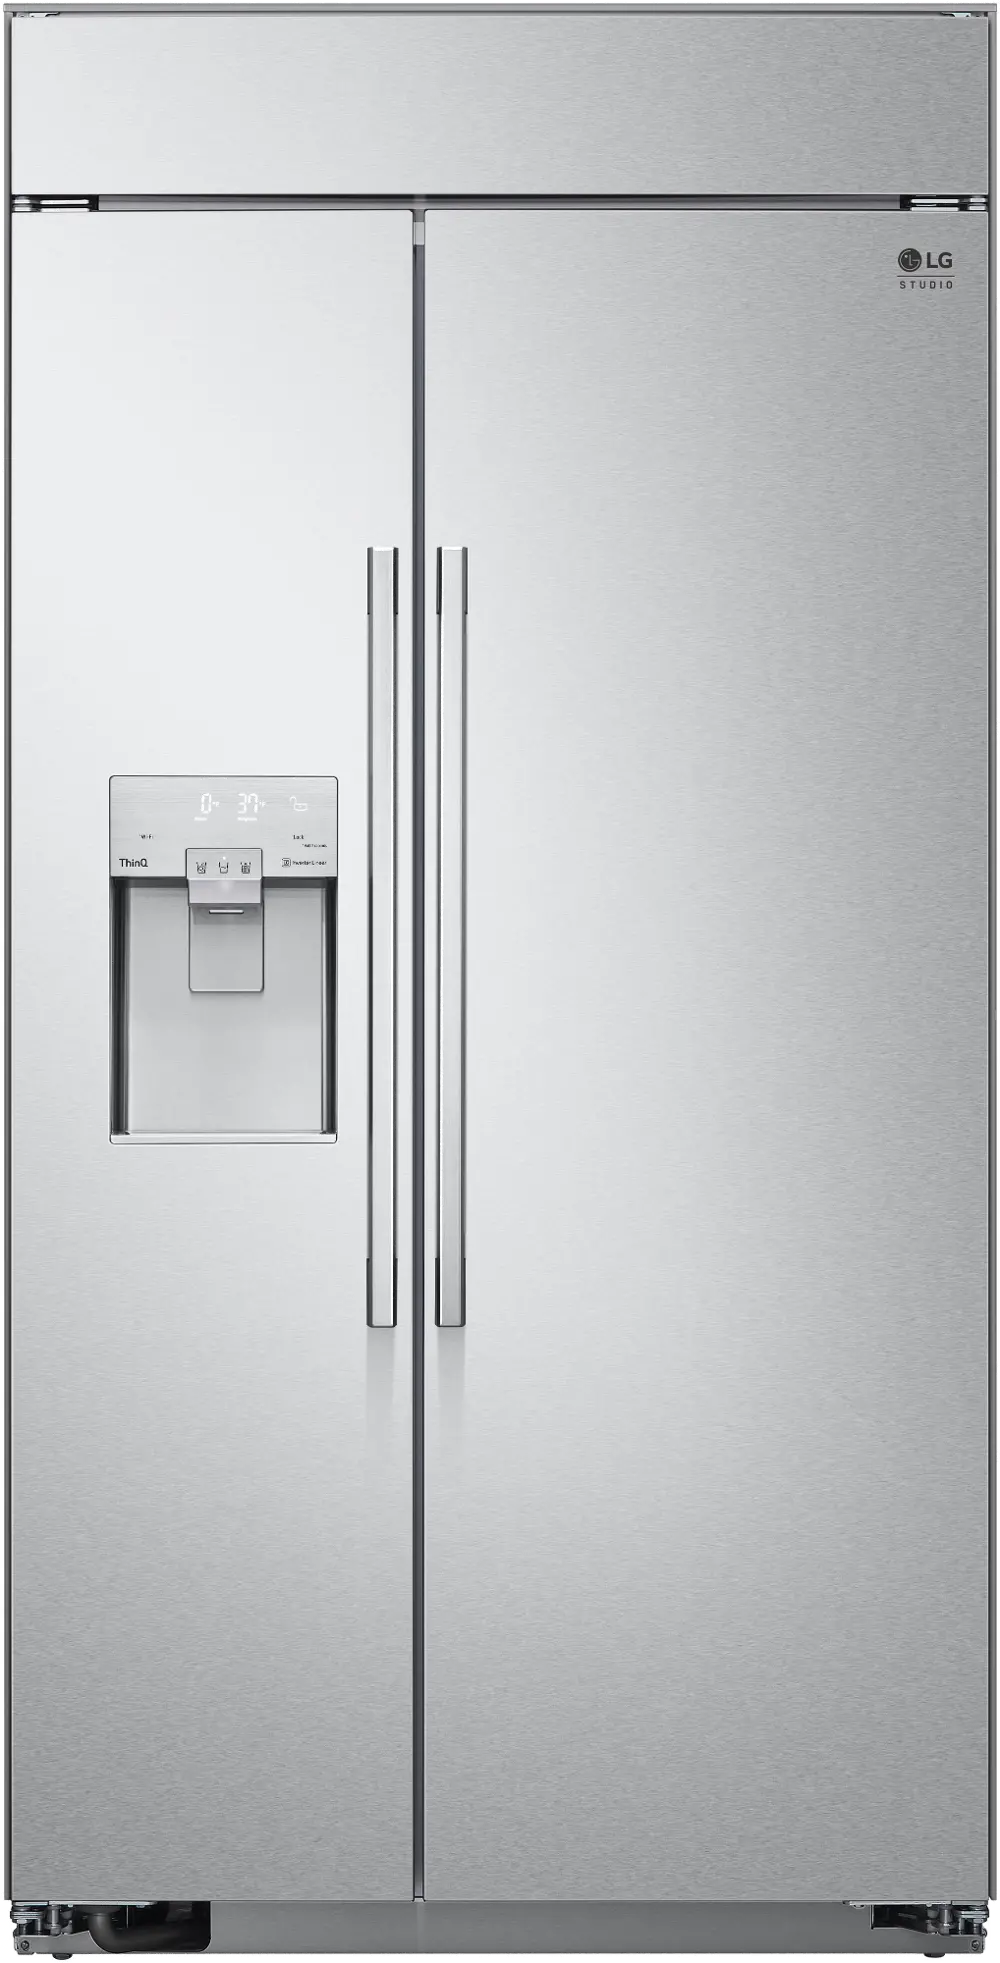 SRSXB2622S LG Studio Built In Side by Side Refrigerator - Stainless Steel-1